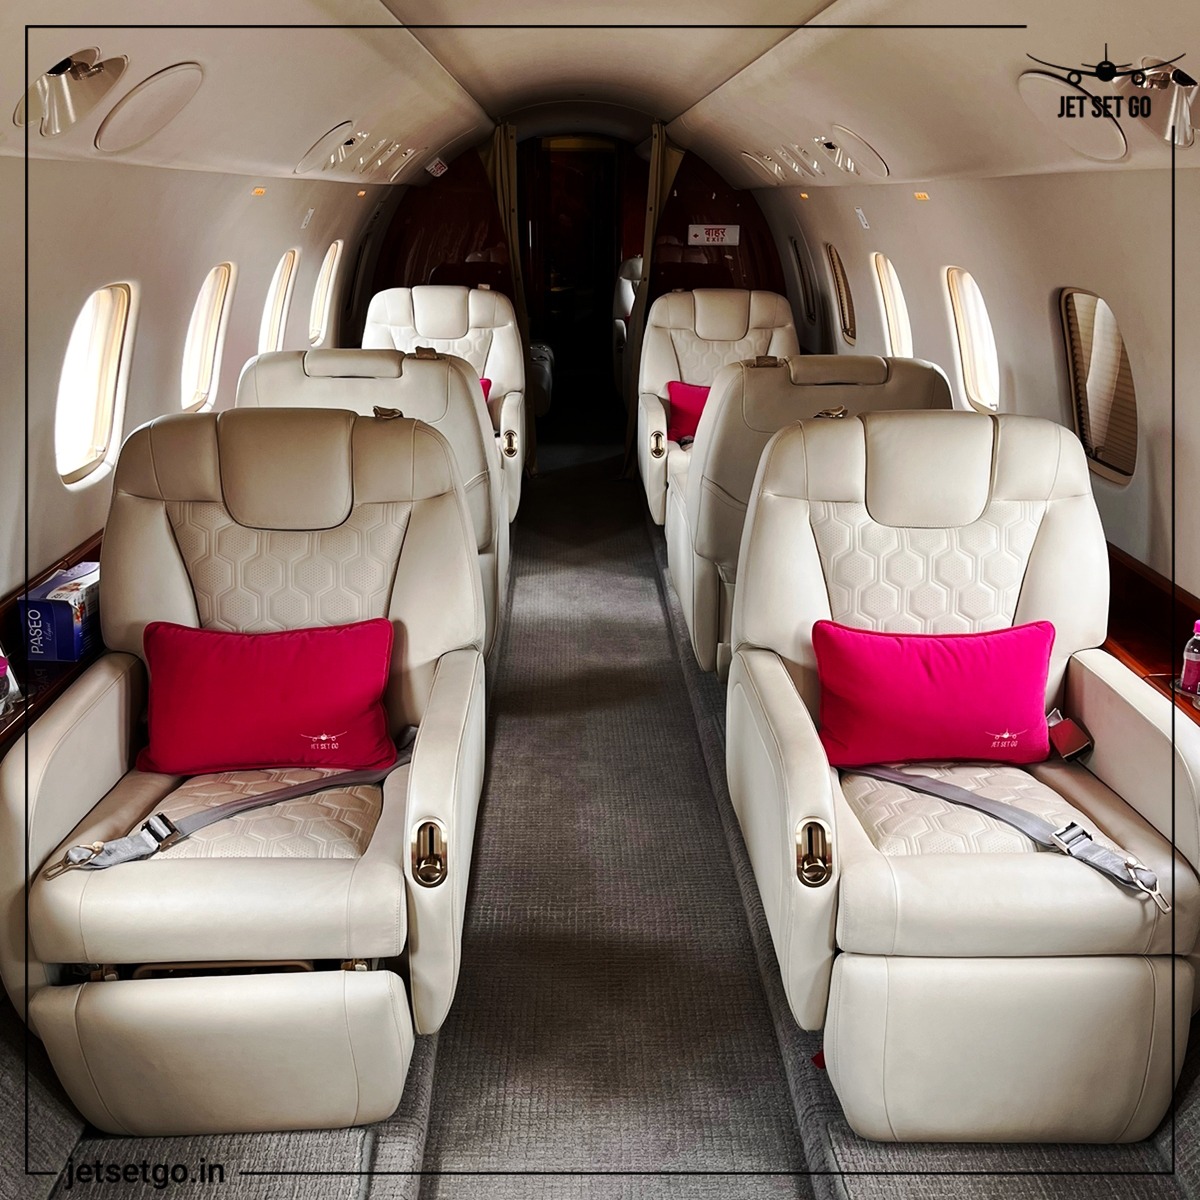 Where to go next ? 
Plan your trip today with JetSetGo✈️☁️
To explore the skies today,
Call us at +91-11-40845858 or Visit jetsetgo.in

#Jetsetgo #JSG_EXPERIENCE #lavishlifestyle #privatejetdaily
#privatejetcharters #privatecharter  #privateaviation #comfortzone